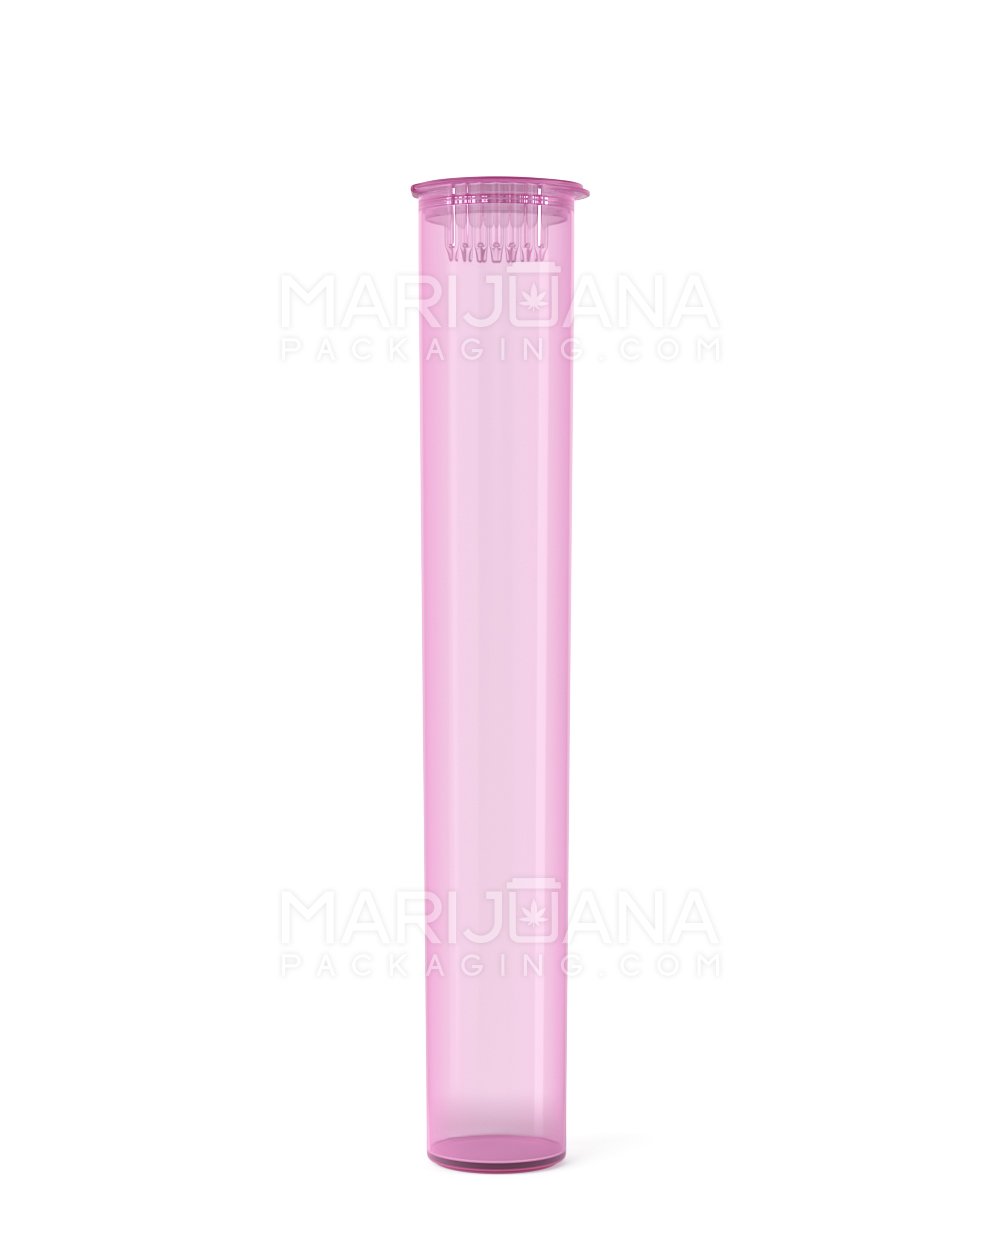 Child Resistant | King Size Pop Top Translucent Plastic Pre-Roll Tubes | 116mm - Pink - 1000 Count - 2